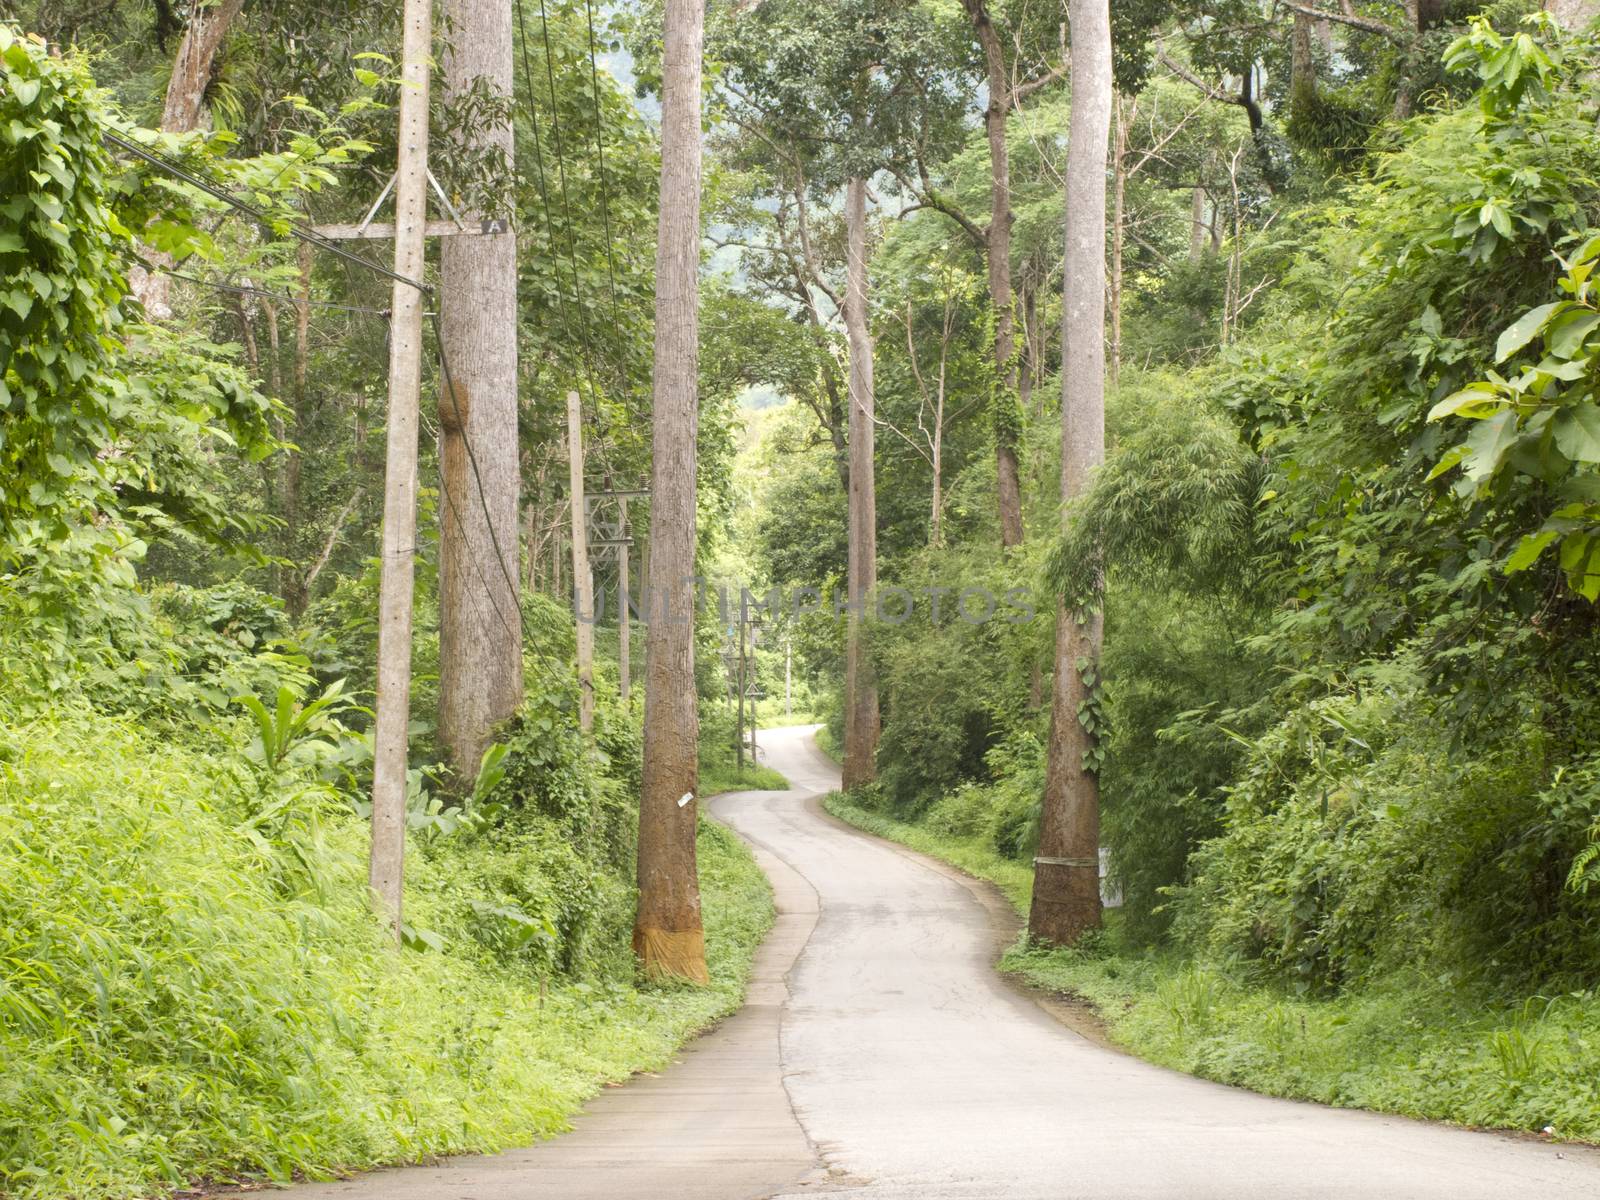 Curved road in forest on hill in Chiang Dao, Chiang Mai, Thailand